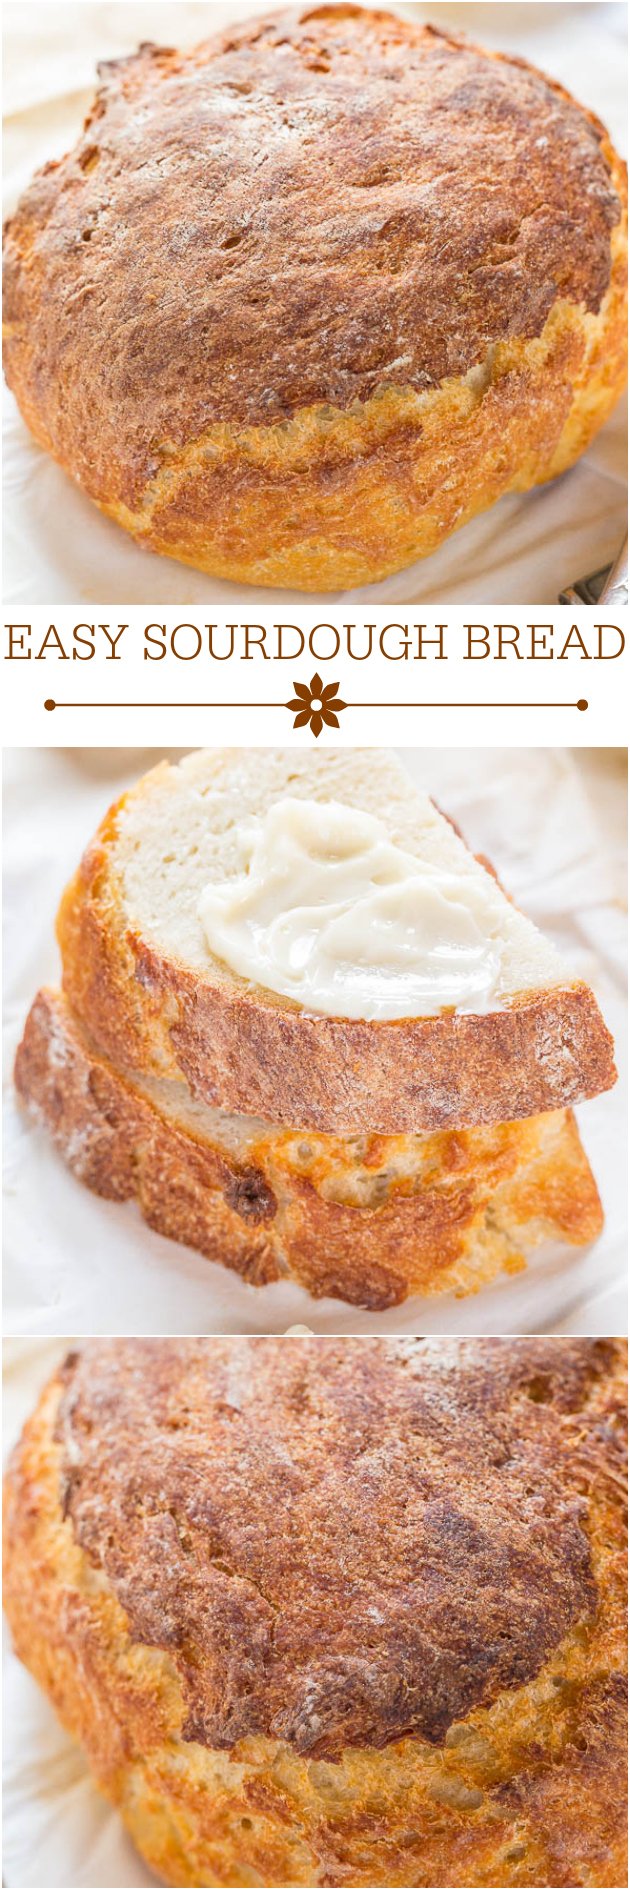 Easy Sourdough Bread - No sourdough starter required!! The bread tastes like it's from a fancy bakery and you won't believe how easy it is!!